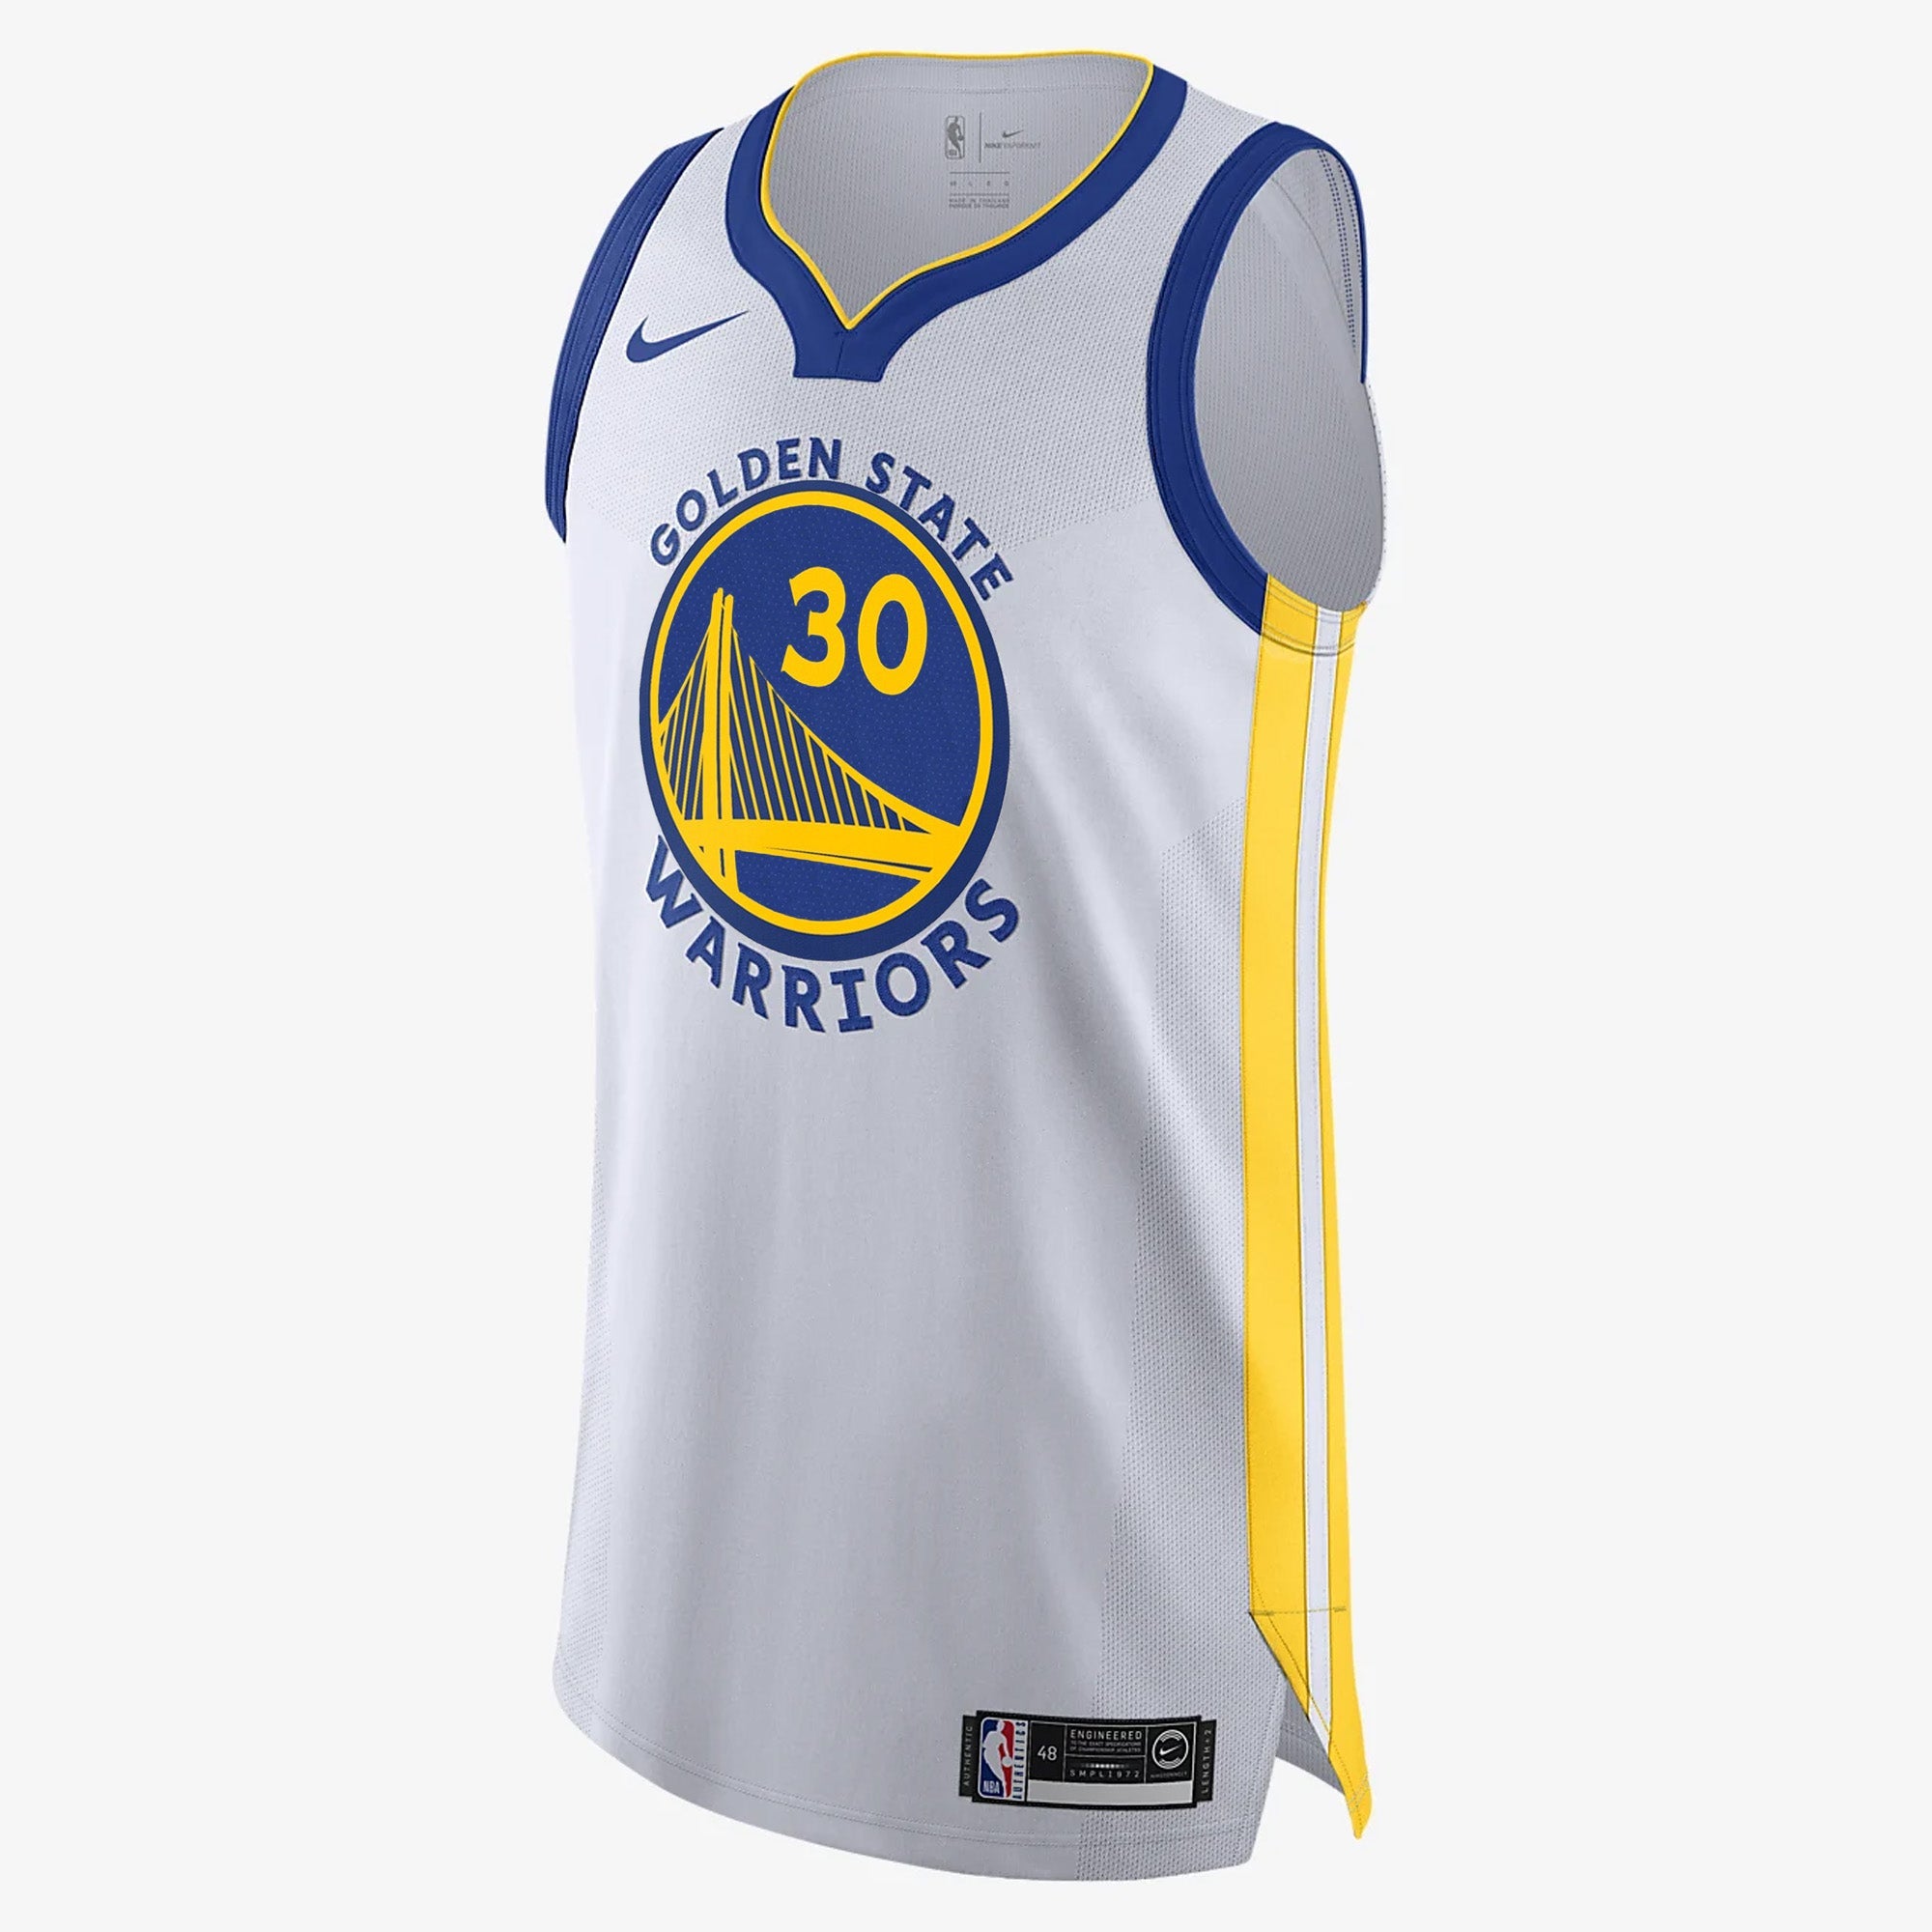 [AT4705-100] Mens Nike NBA GS Warriors Stephen Curry White Authentic J ...